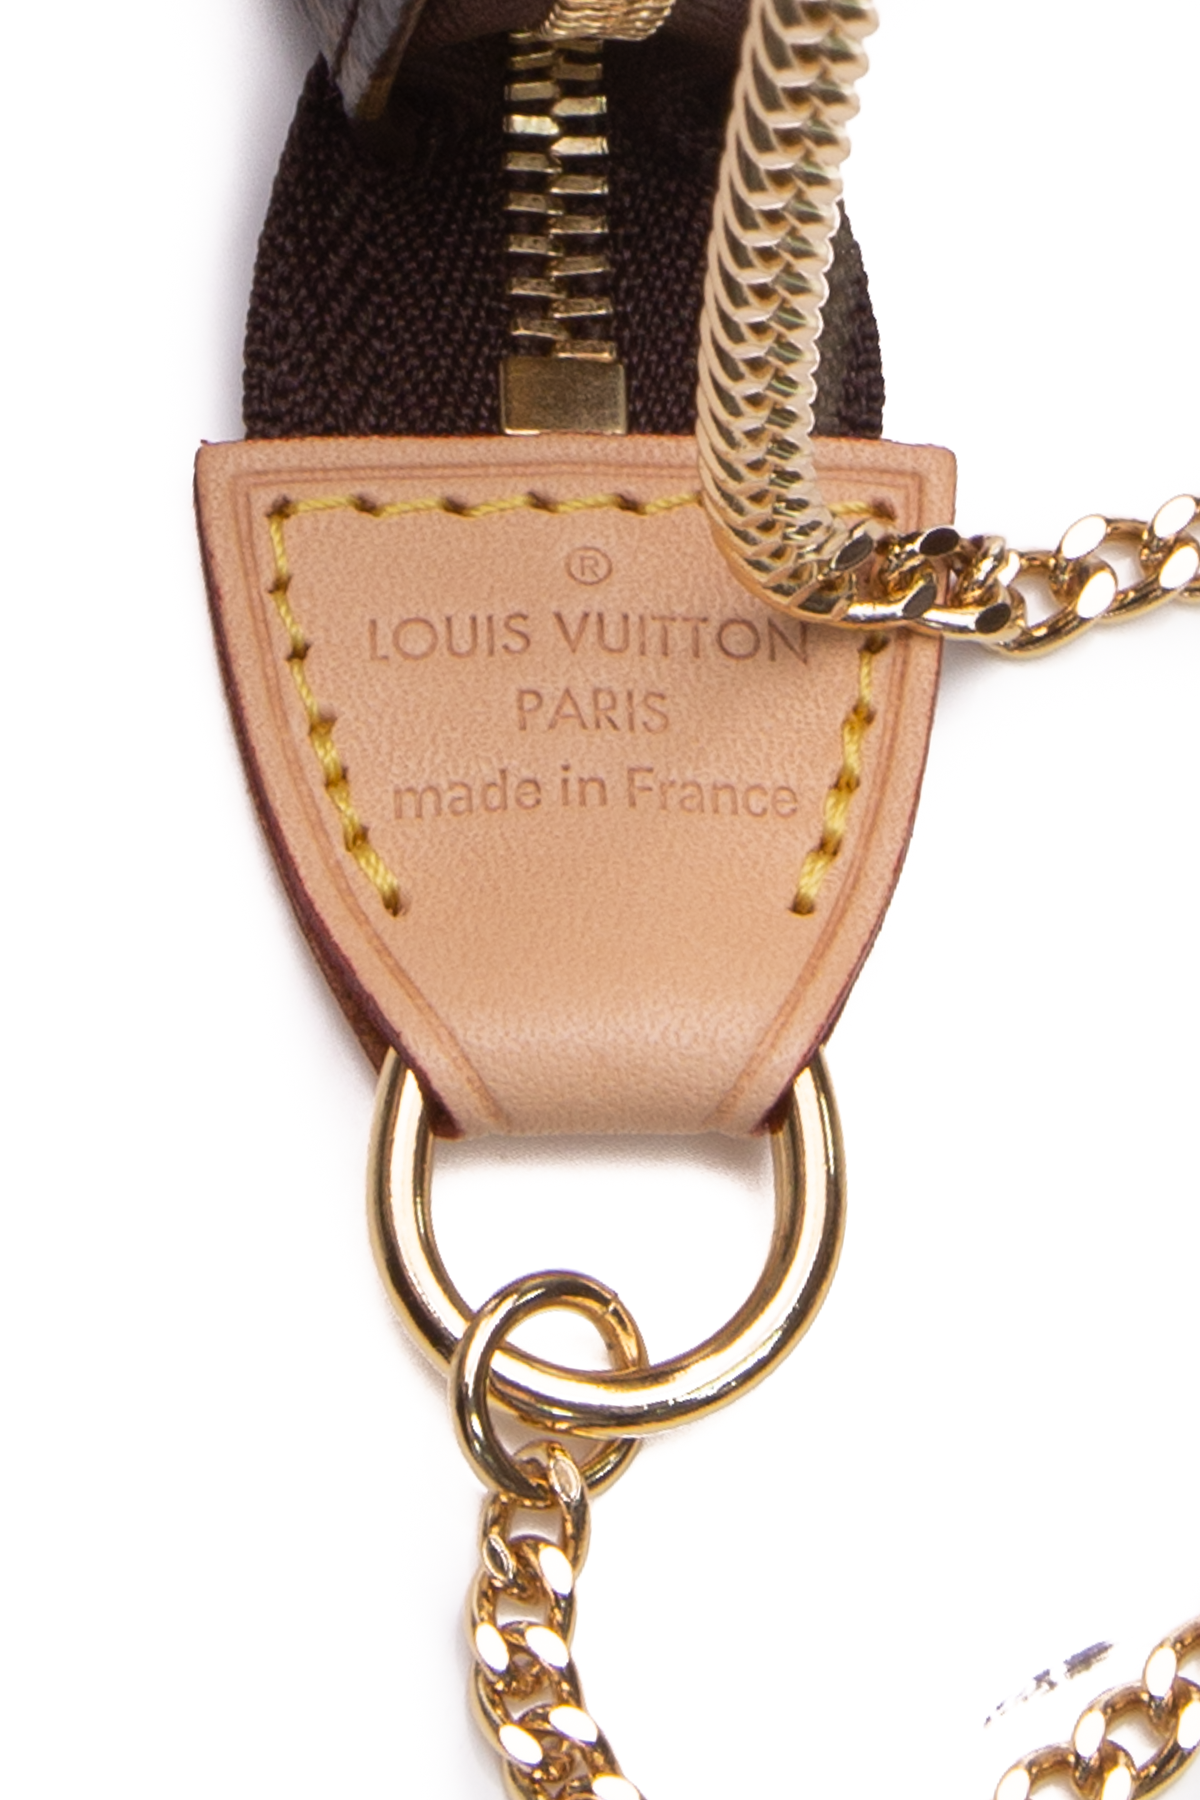 WHAT FITS INSIDE THE LOUIS VUITTON POCHETTE ACCESSORIES? IS IT STILL WORTH  IT? 